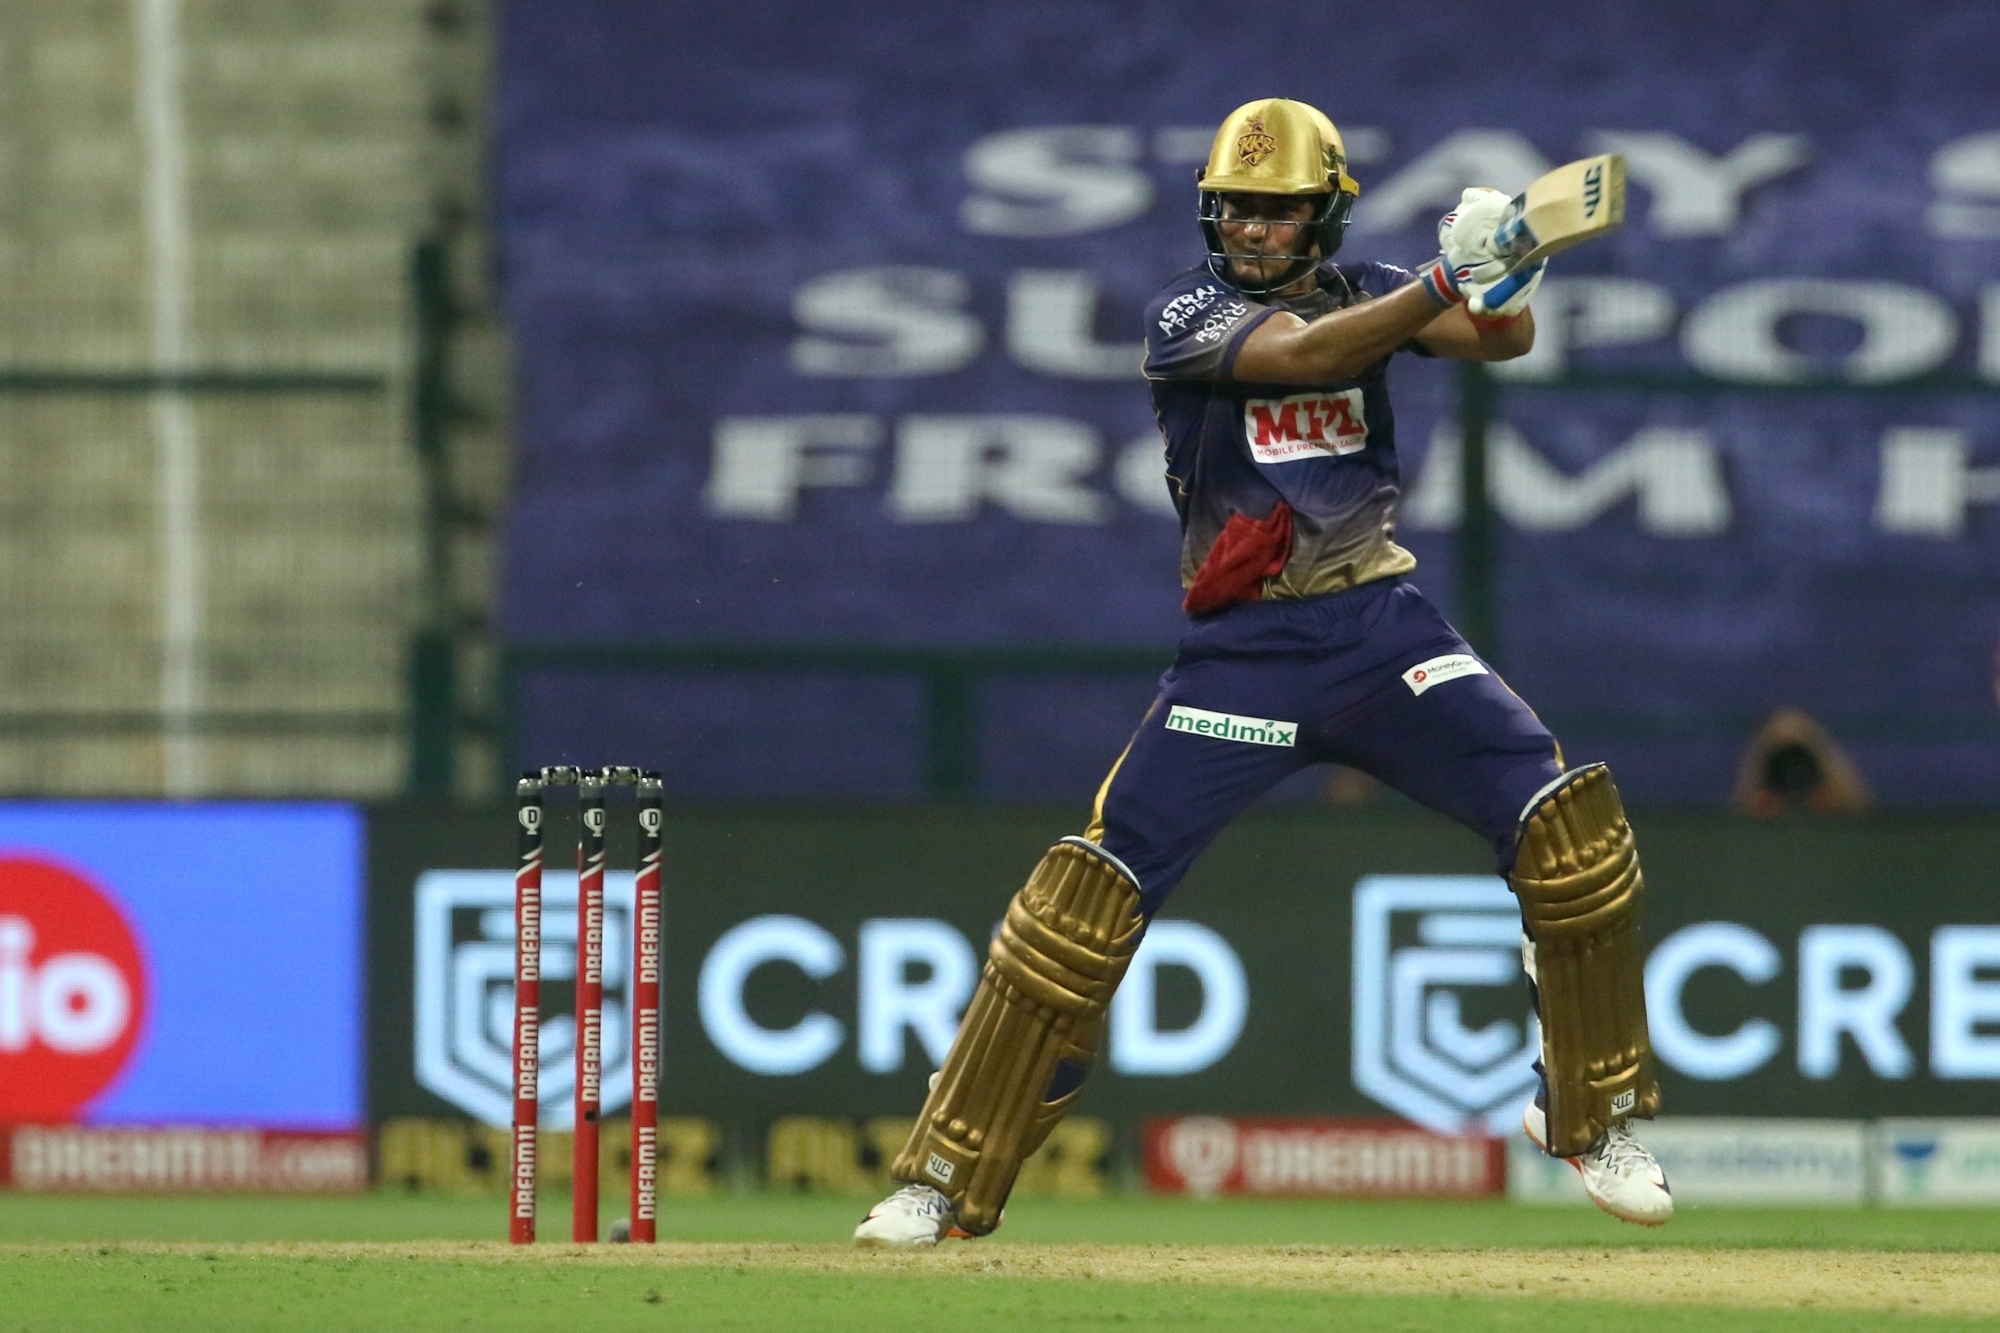 Gill's cautious approach in powerplays has hampered KKR's momentum | BCCI/IPL